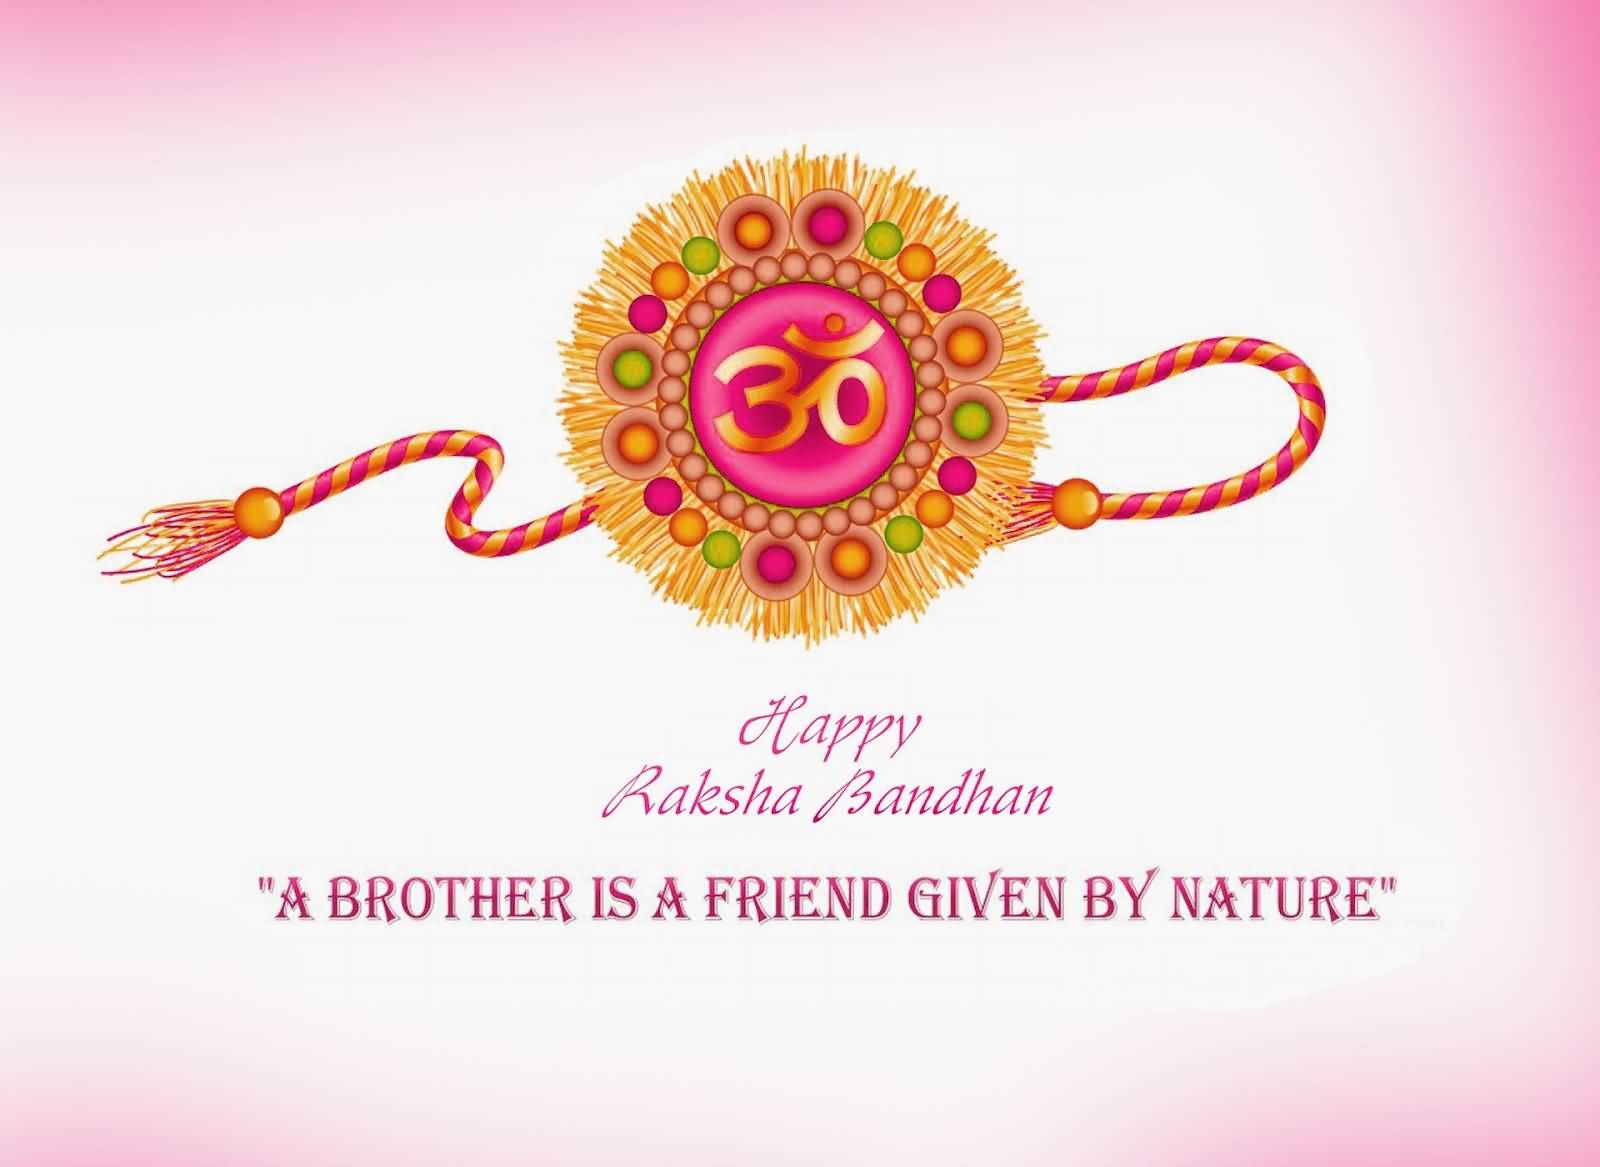 Happy Raksha Bandhan A Brother Is A Friend Given By Nature